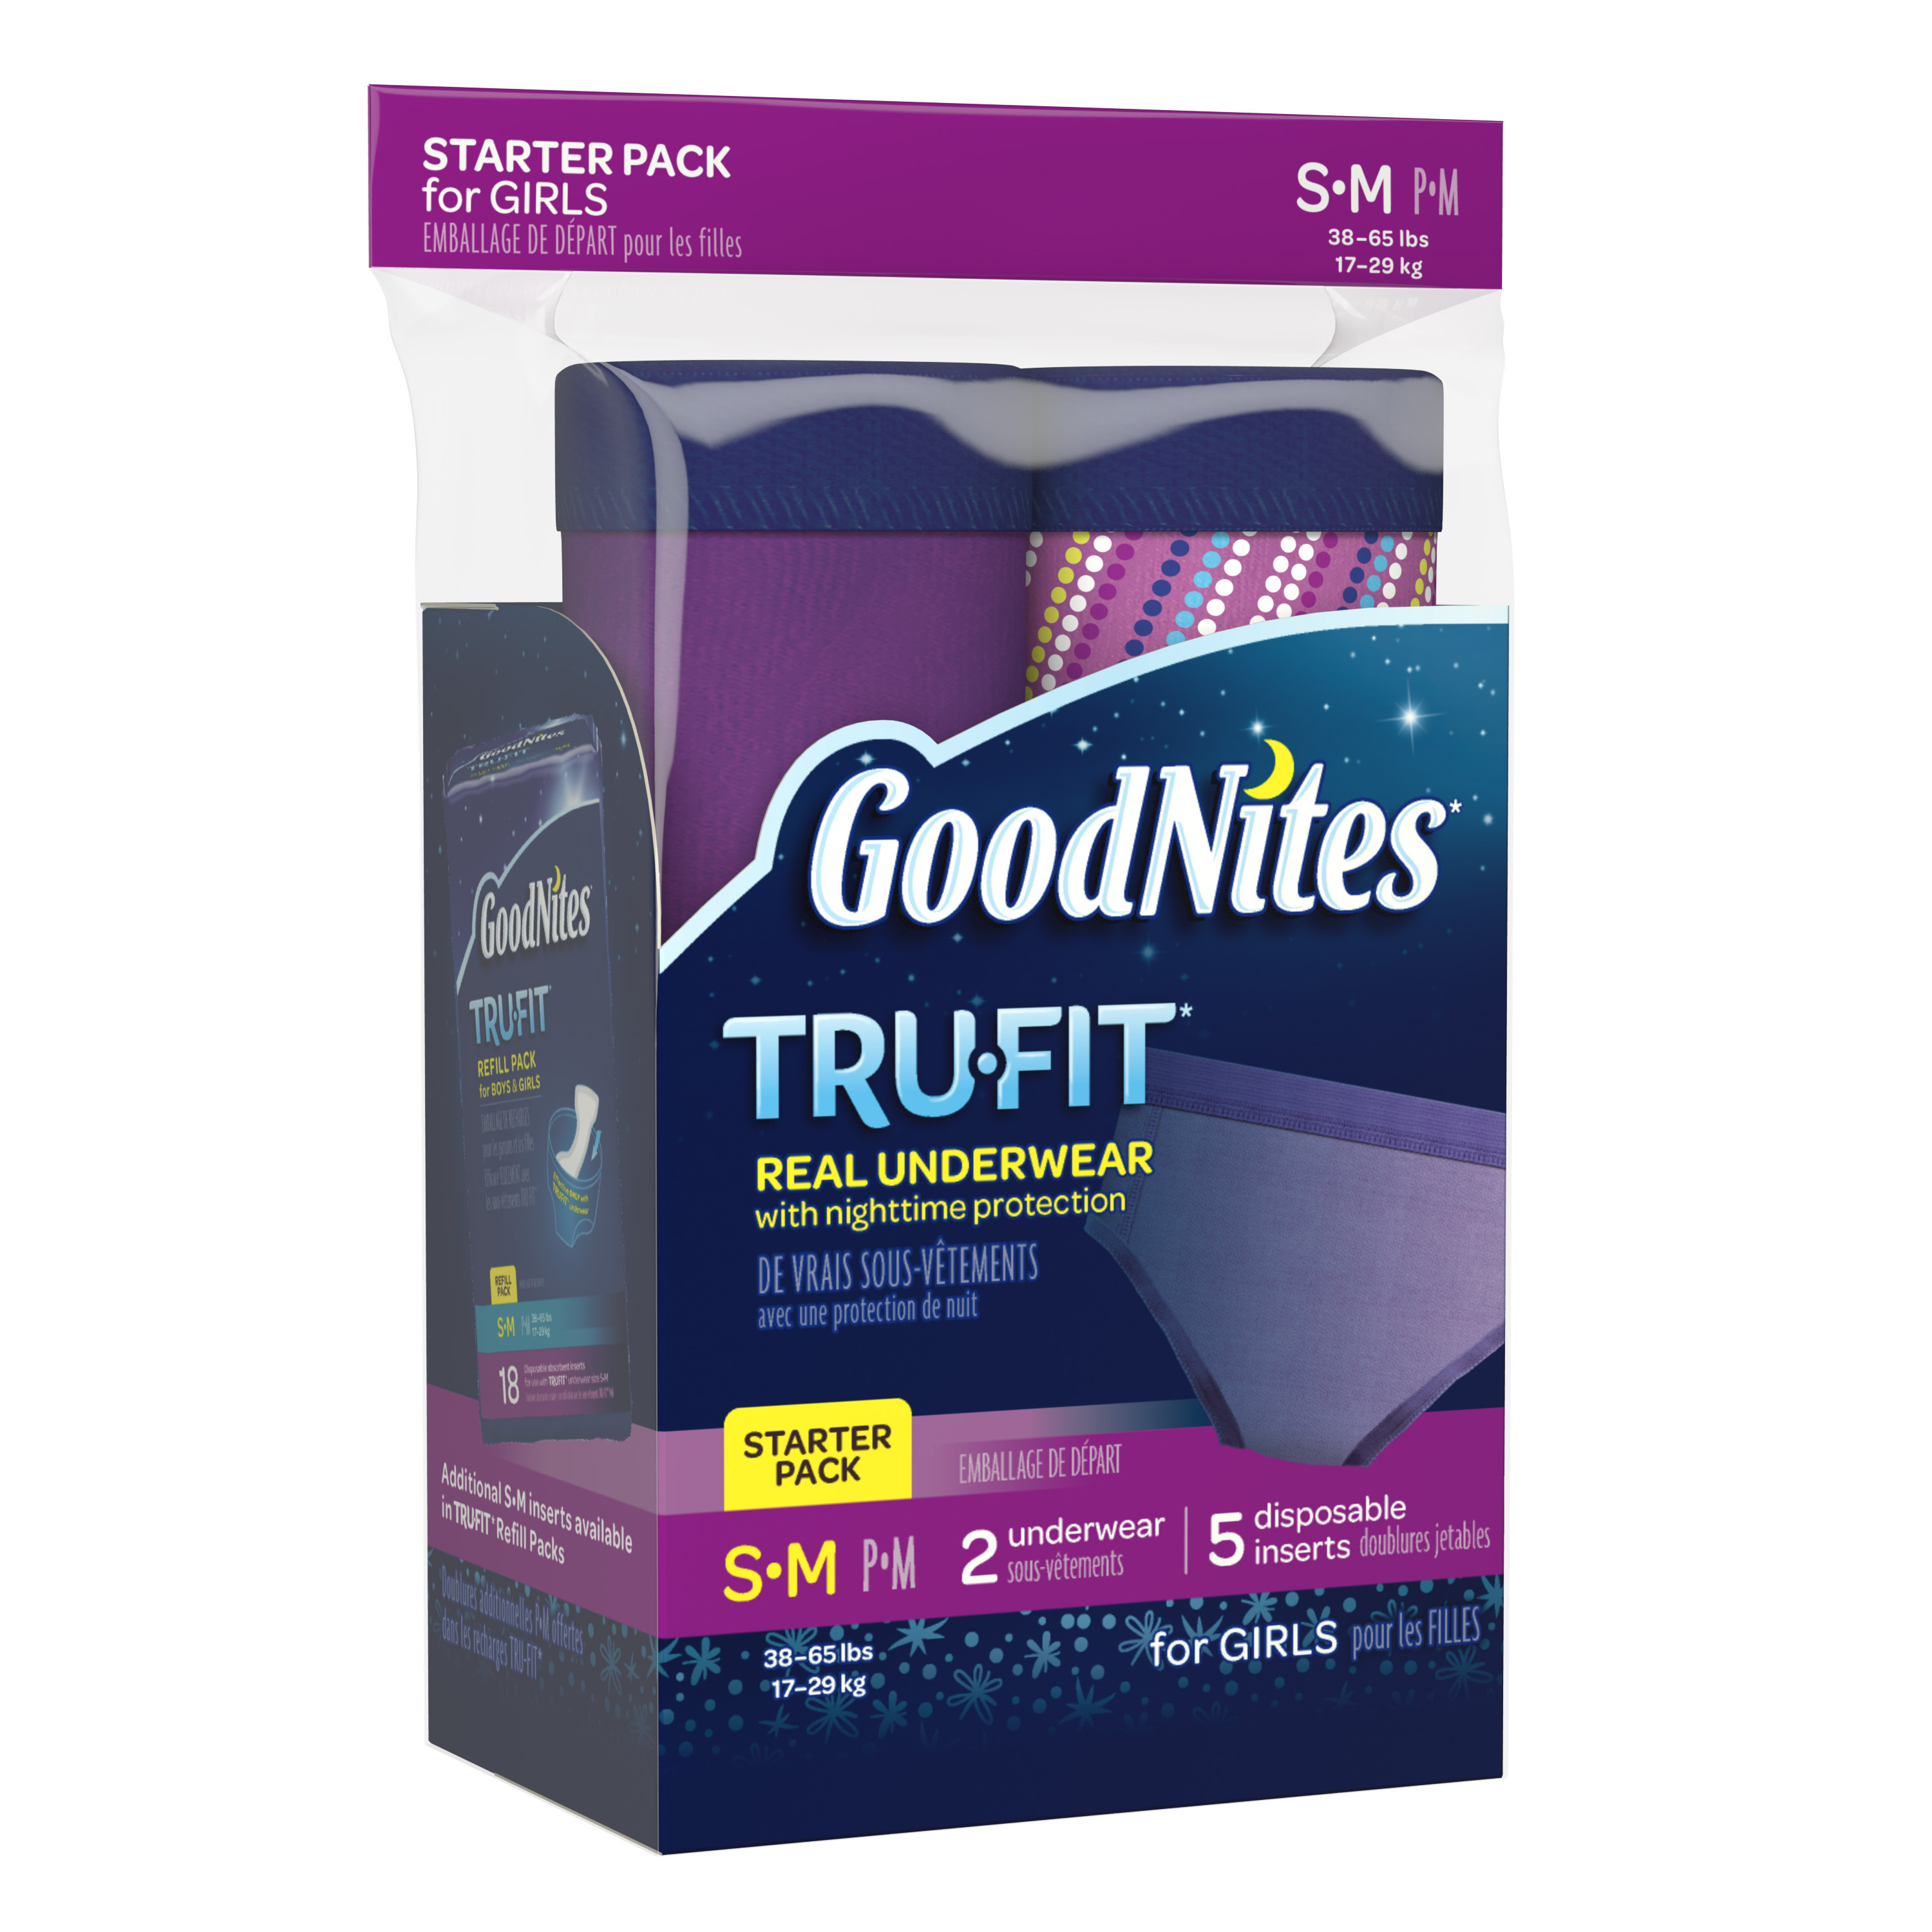 GoodNites Tru-Fit Bedwetting Underwear with Nighttime Protection Starter Pack for Girls, S/M, 7ct - image 4 of 6